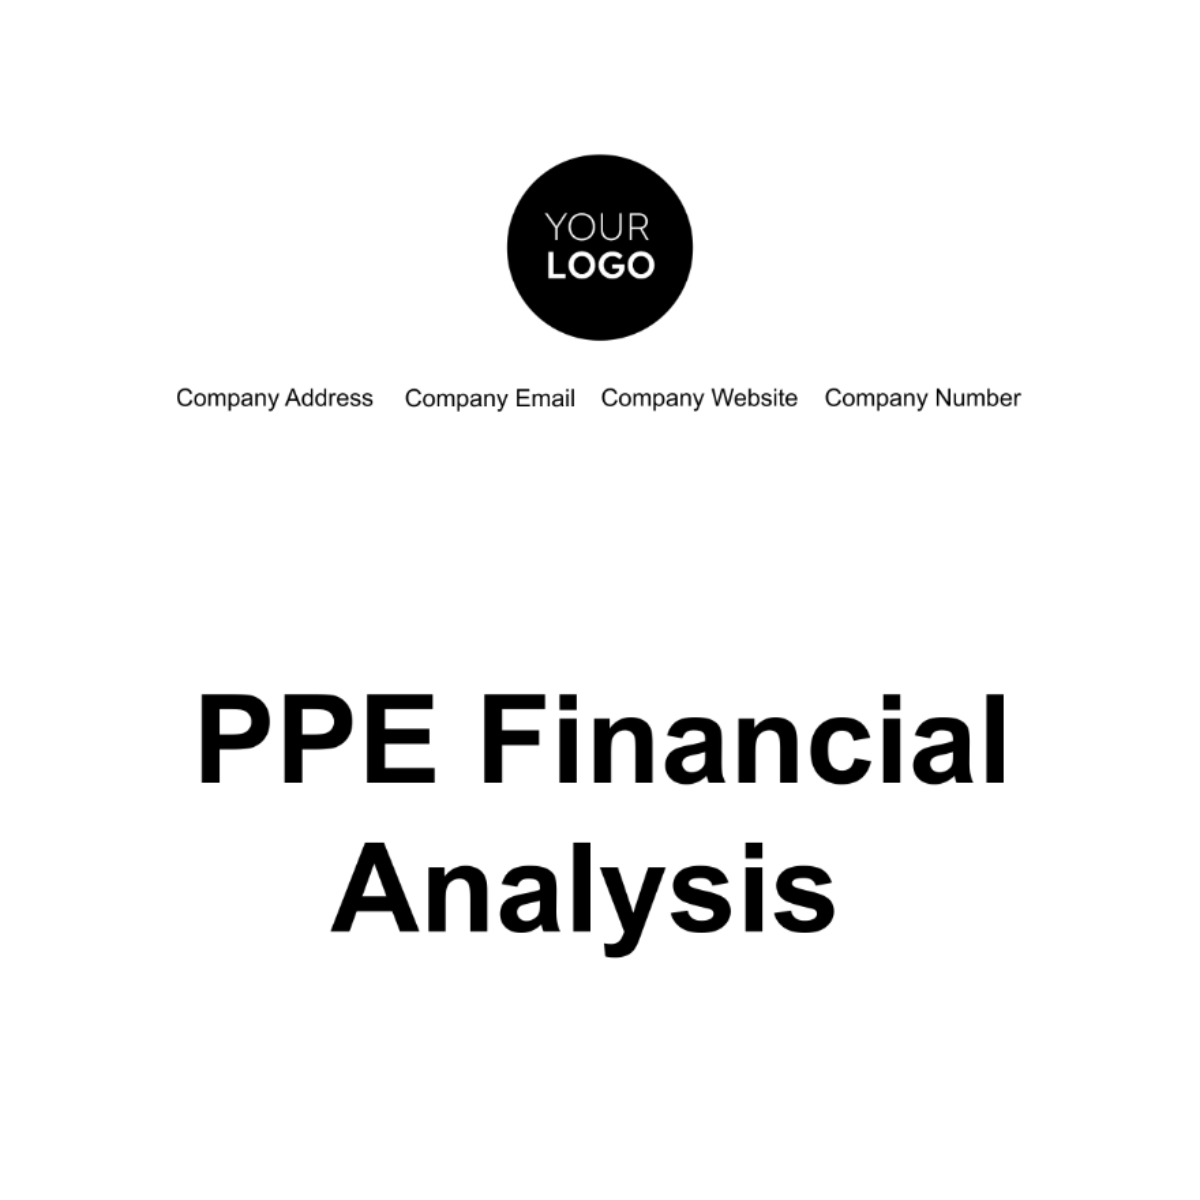 PPE Financial Analysis Template